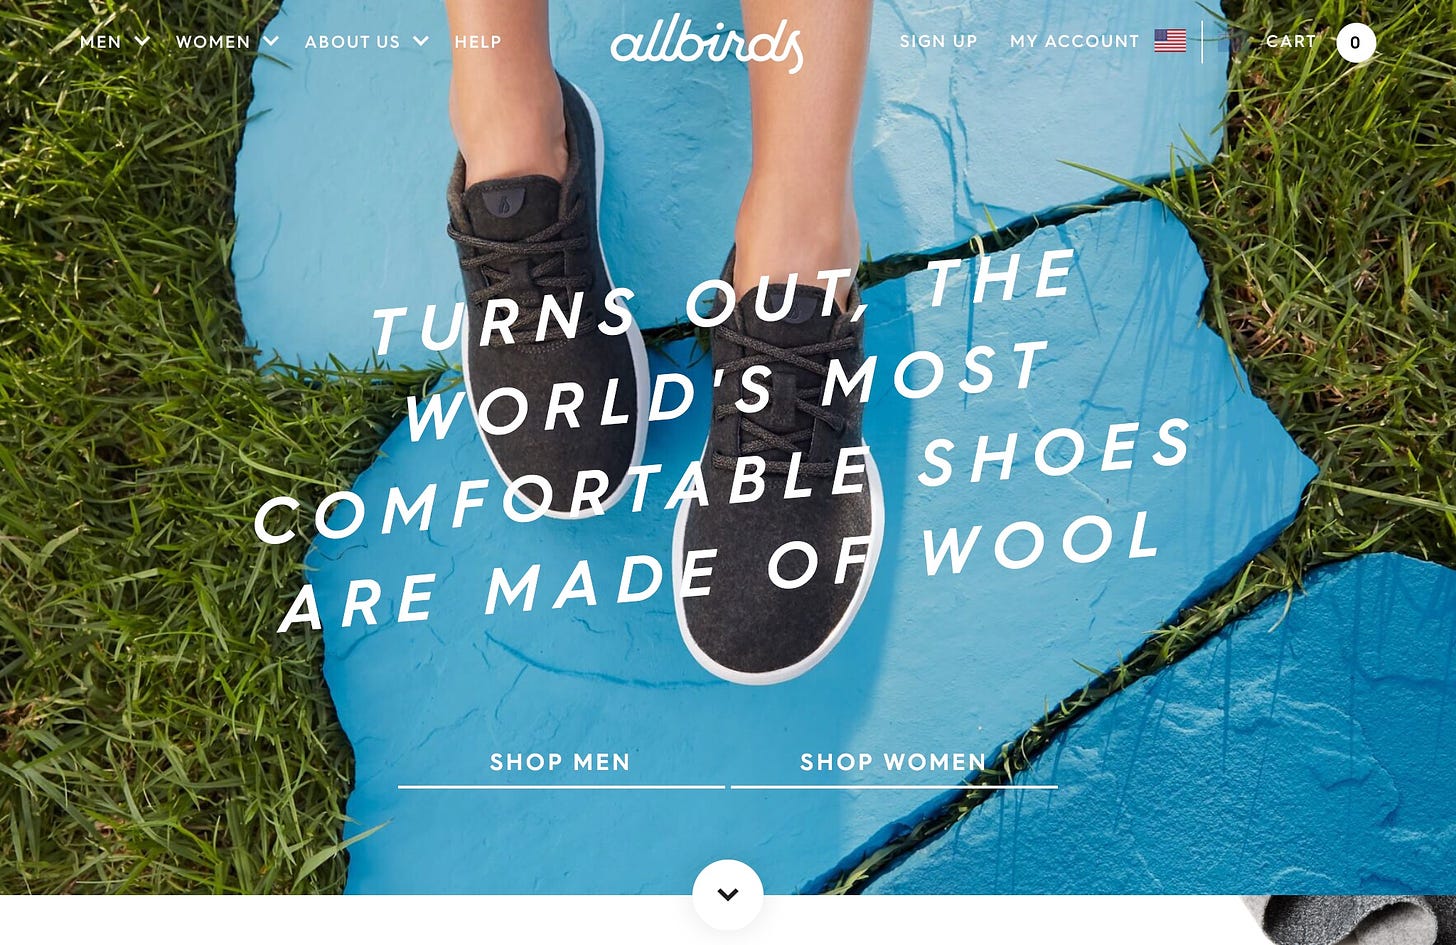 Stitch Fix, Allbirds and the Break-Out Hits in the Fashion Industry